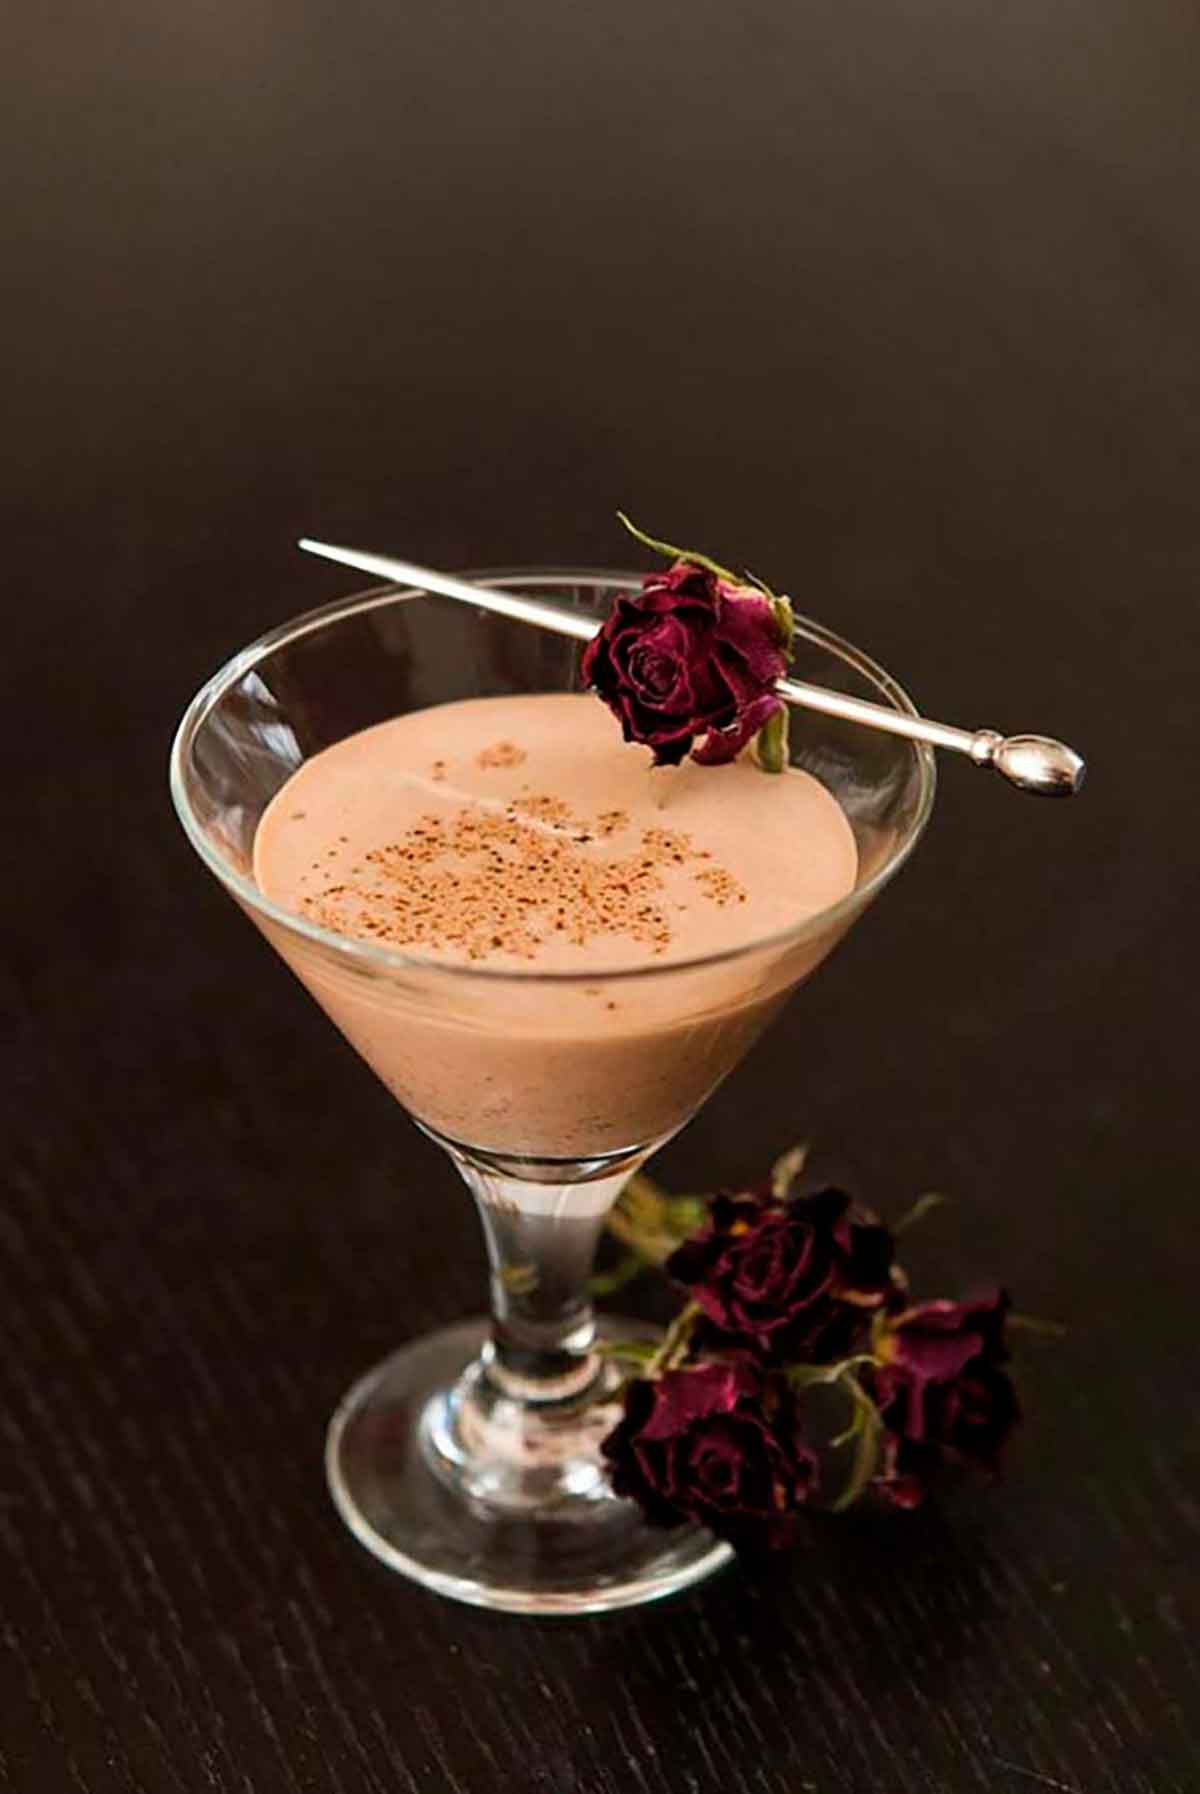 A small glass of Mexican chocolate liqueur sprinkled with cinnamon on a black table with small roses for garnish.